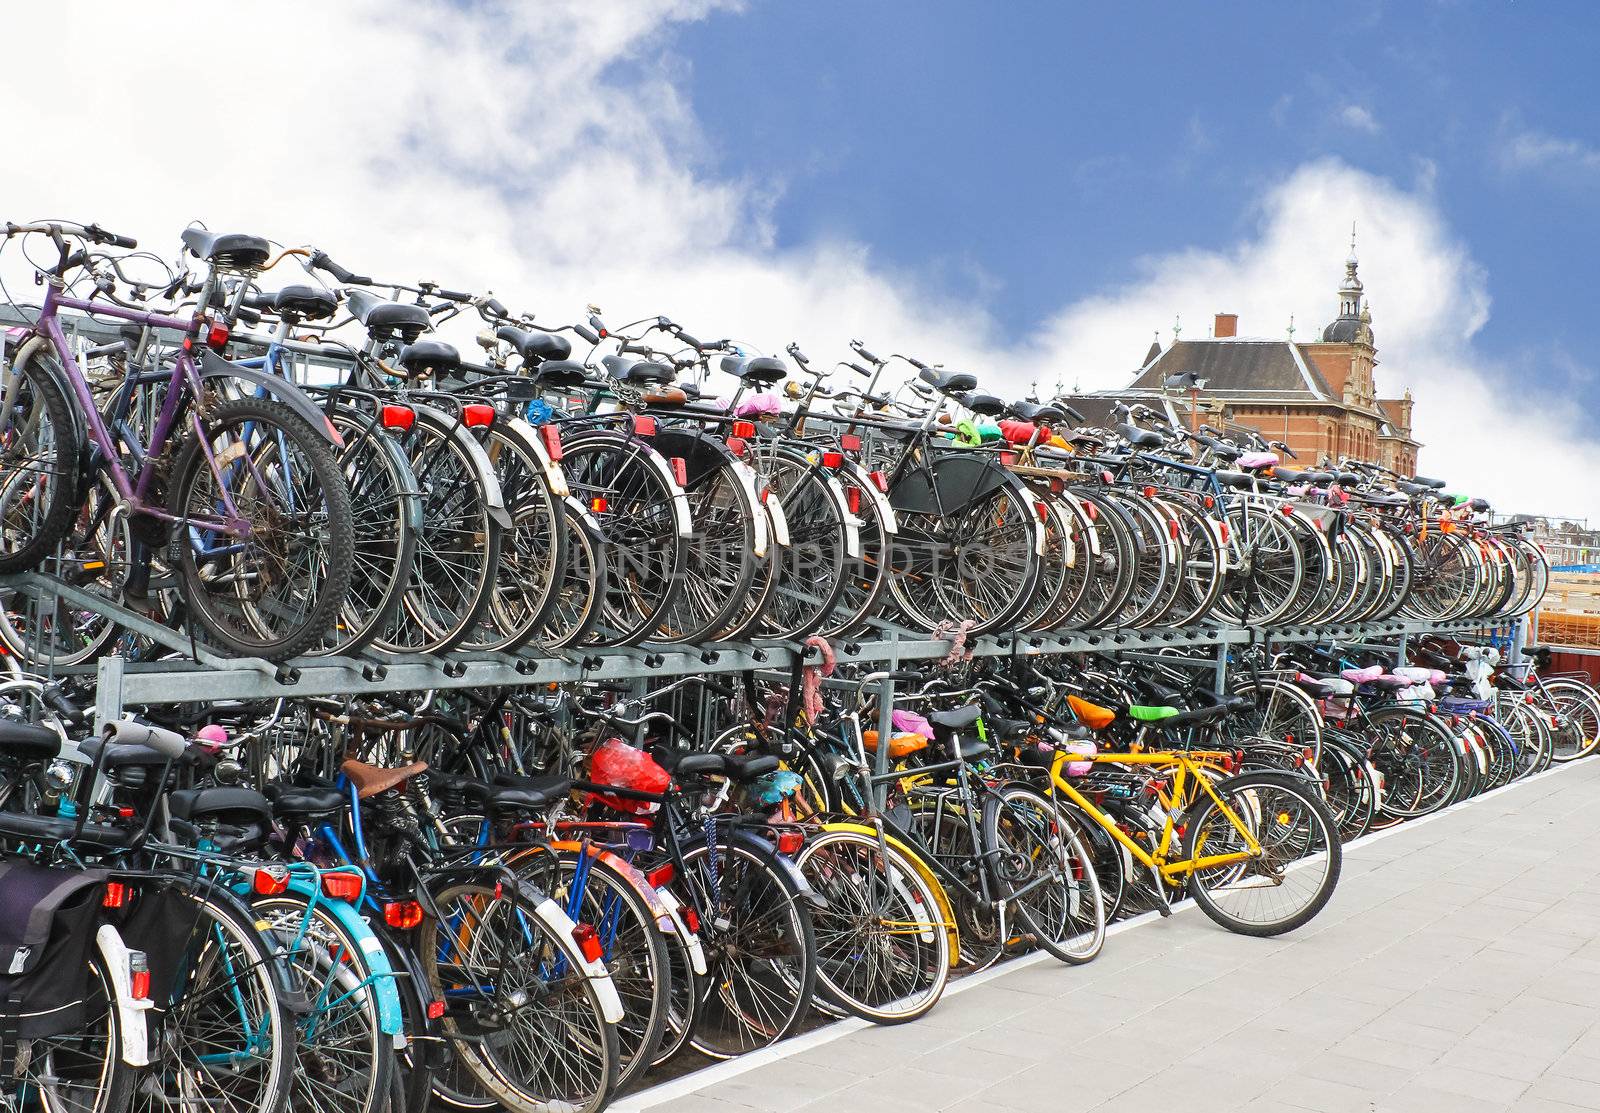 Plenty bicycles at parking lot in 